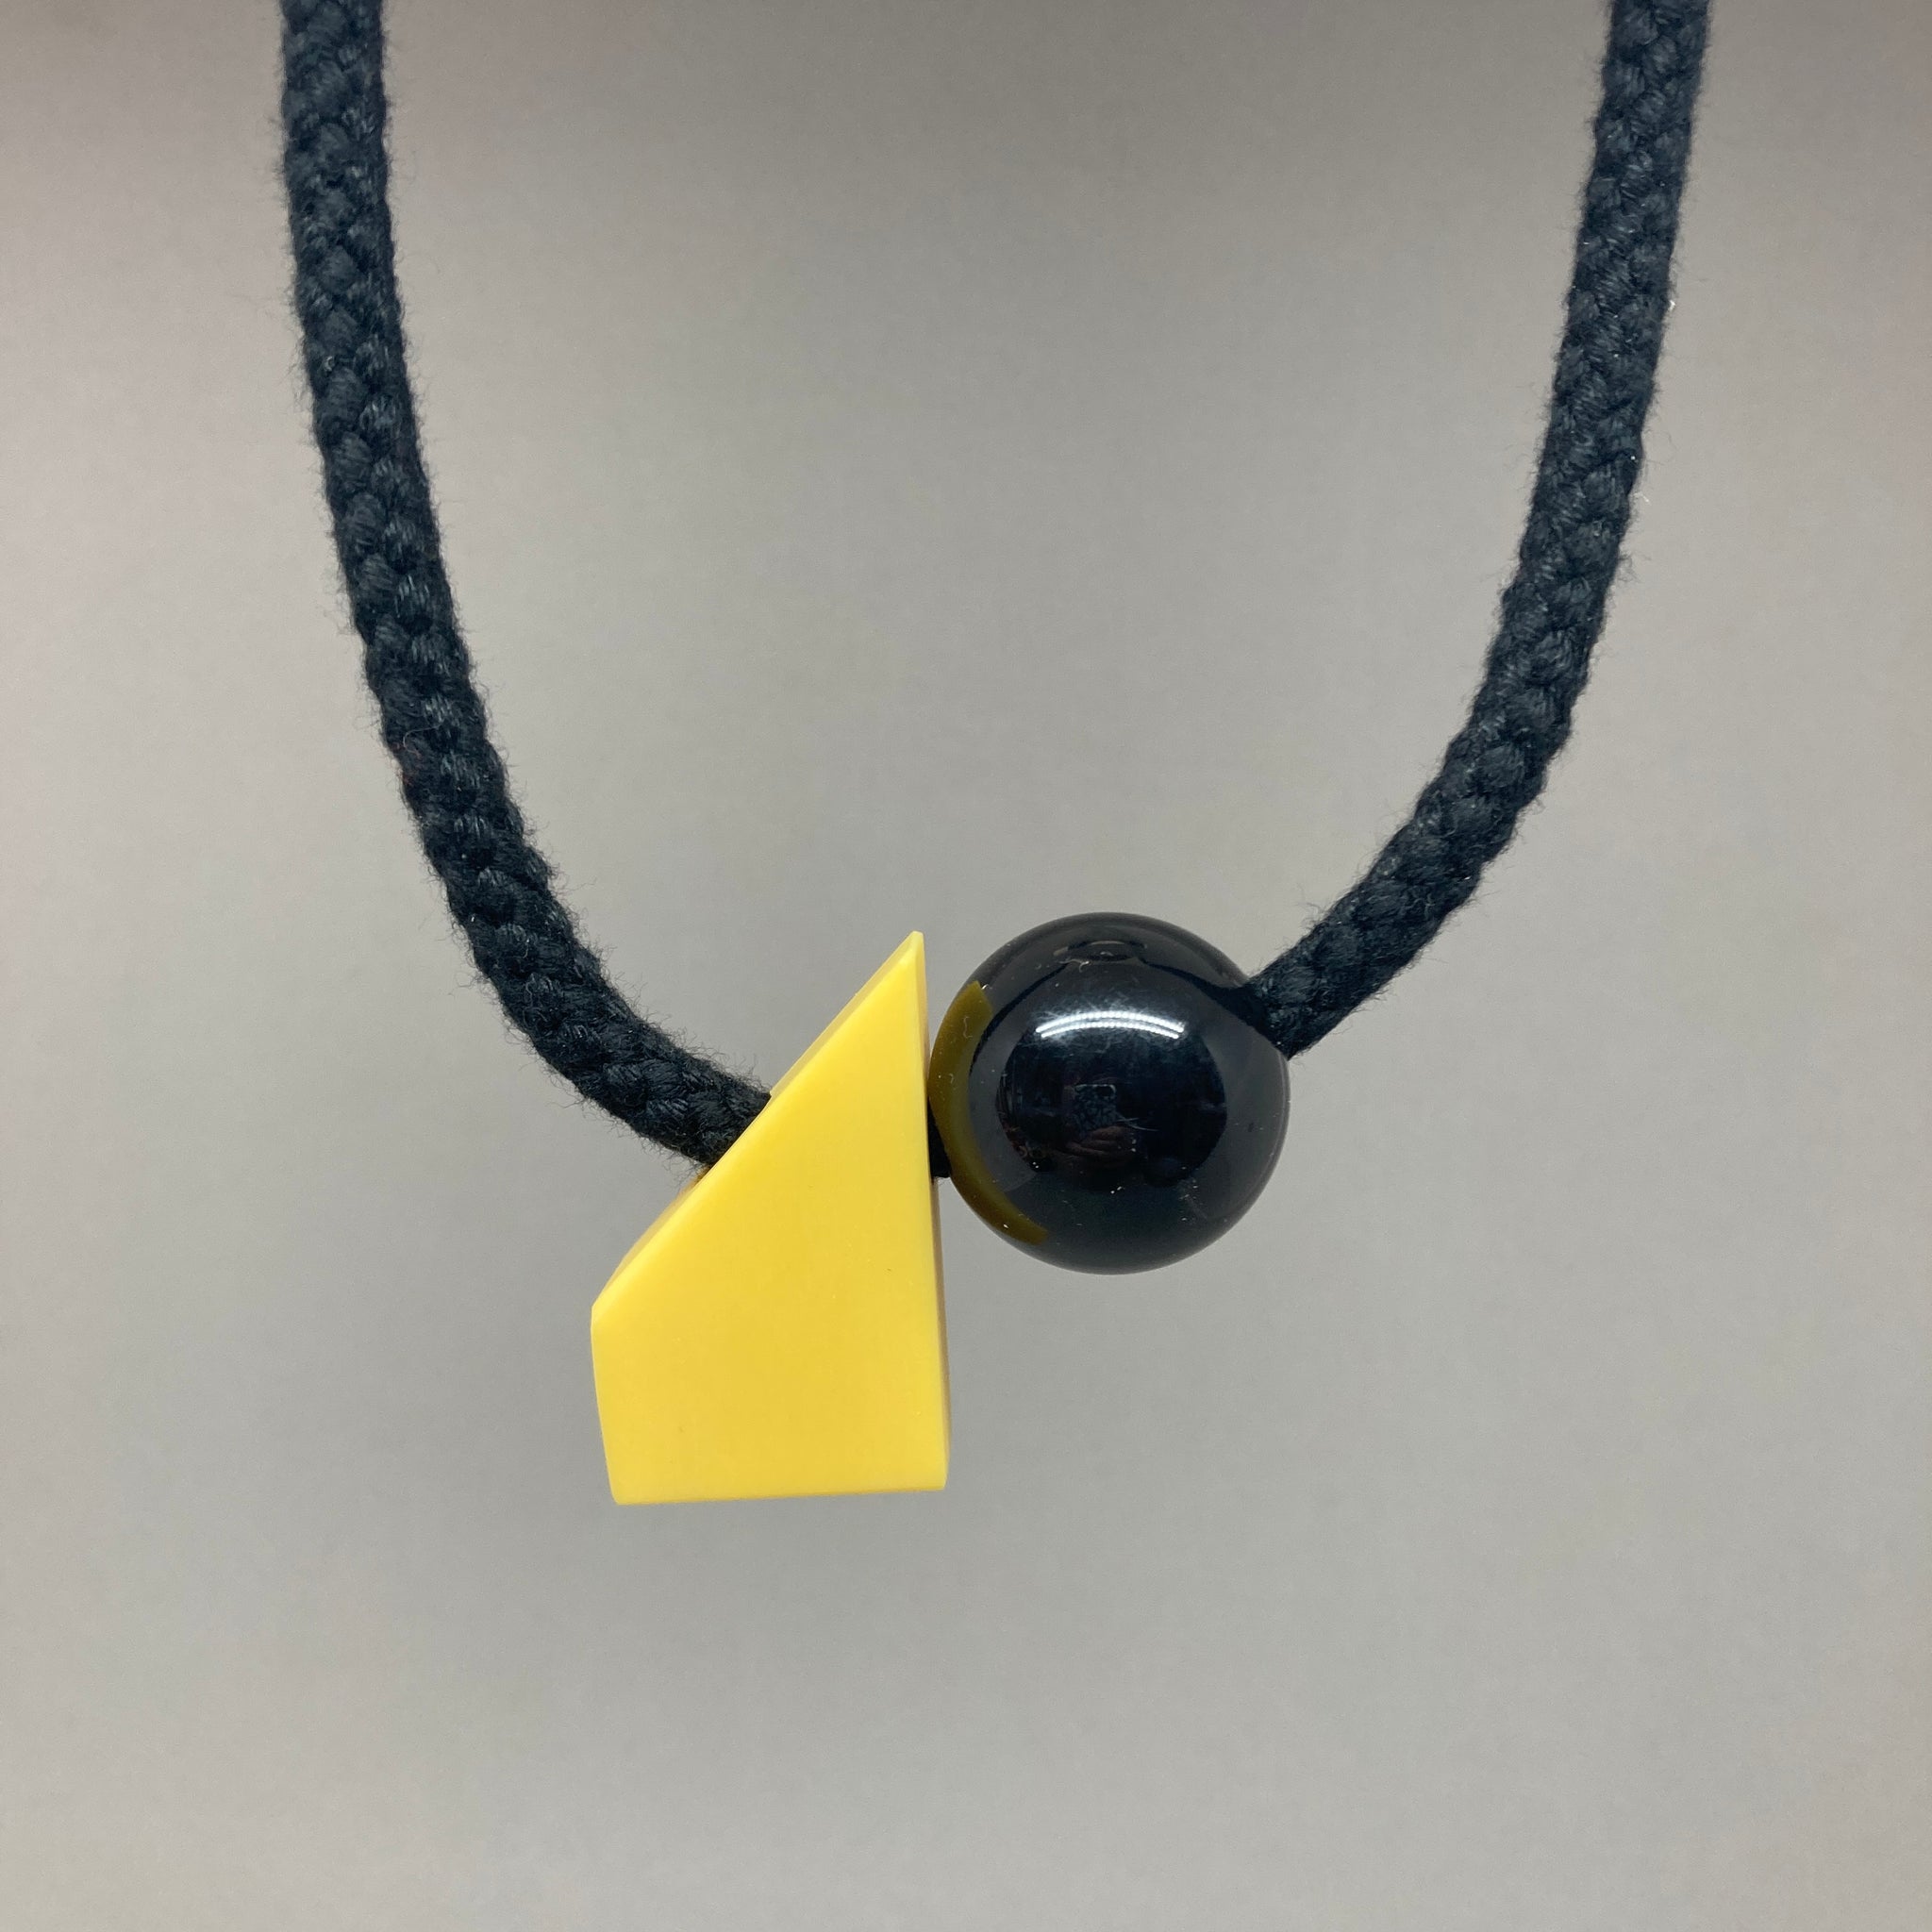 Sample sale necklace with yellow shape